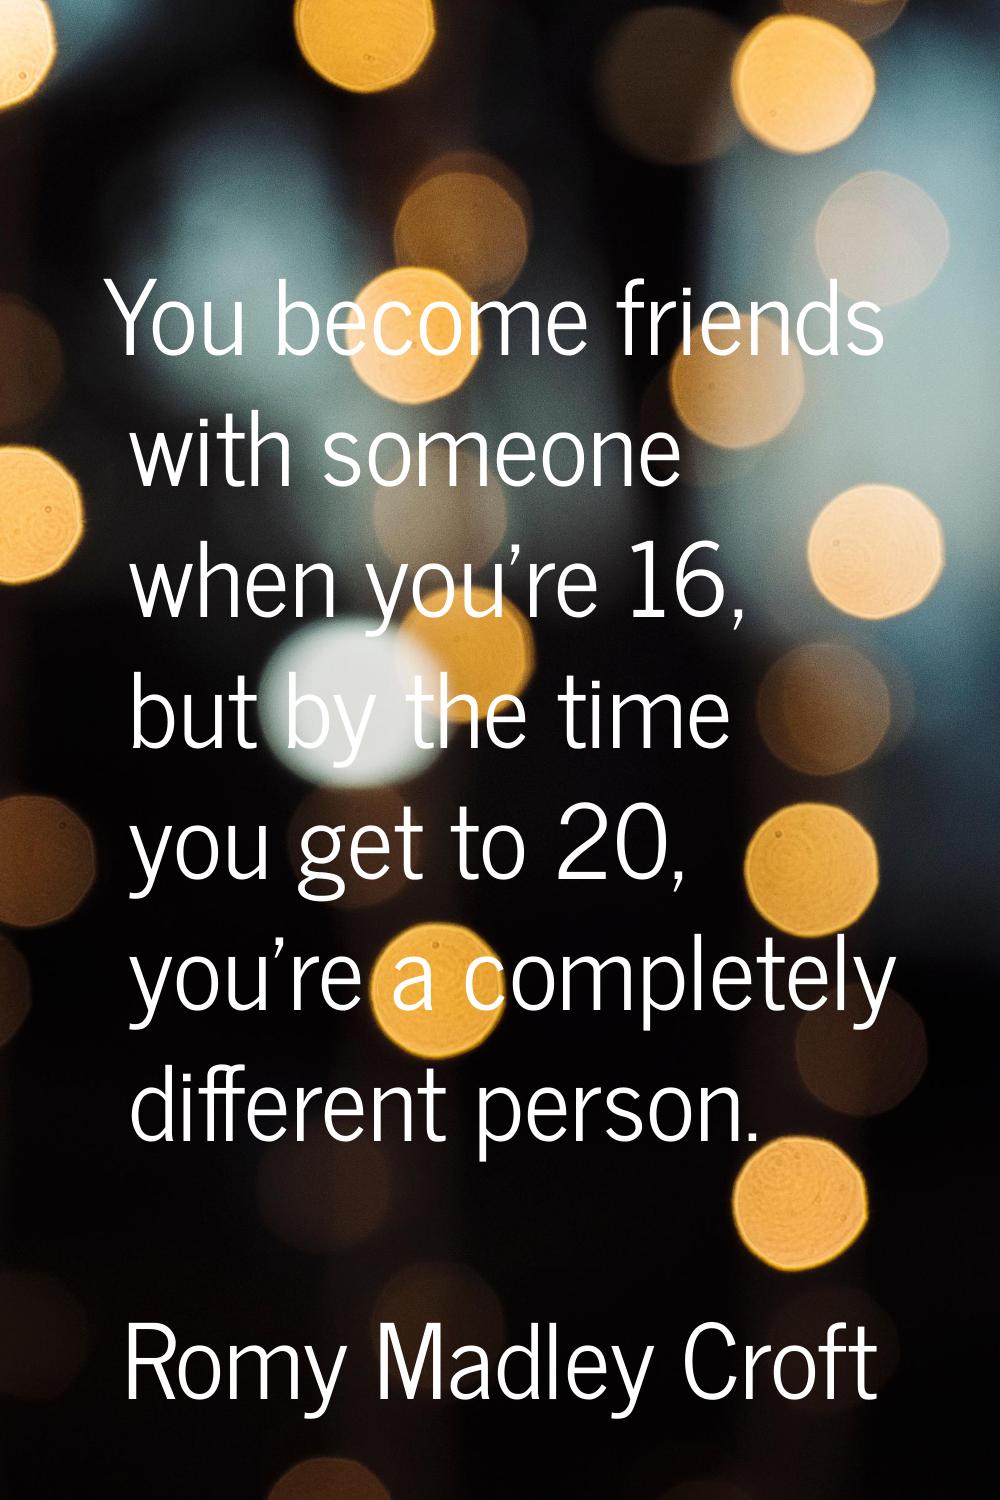 You become friends with someone when you're 16, but by the time you get to 20, you're a completely 